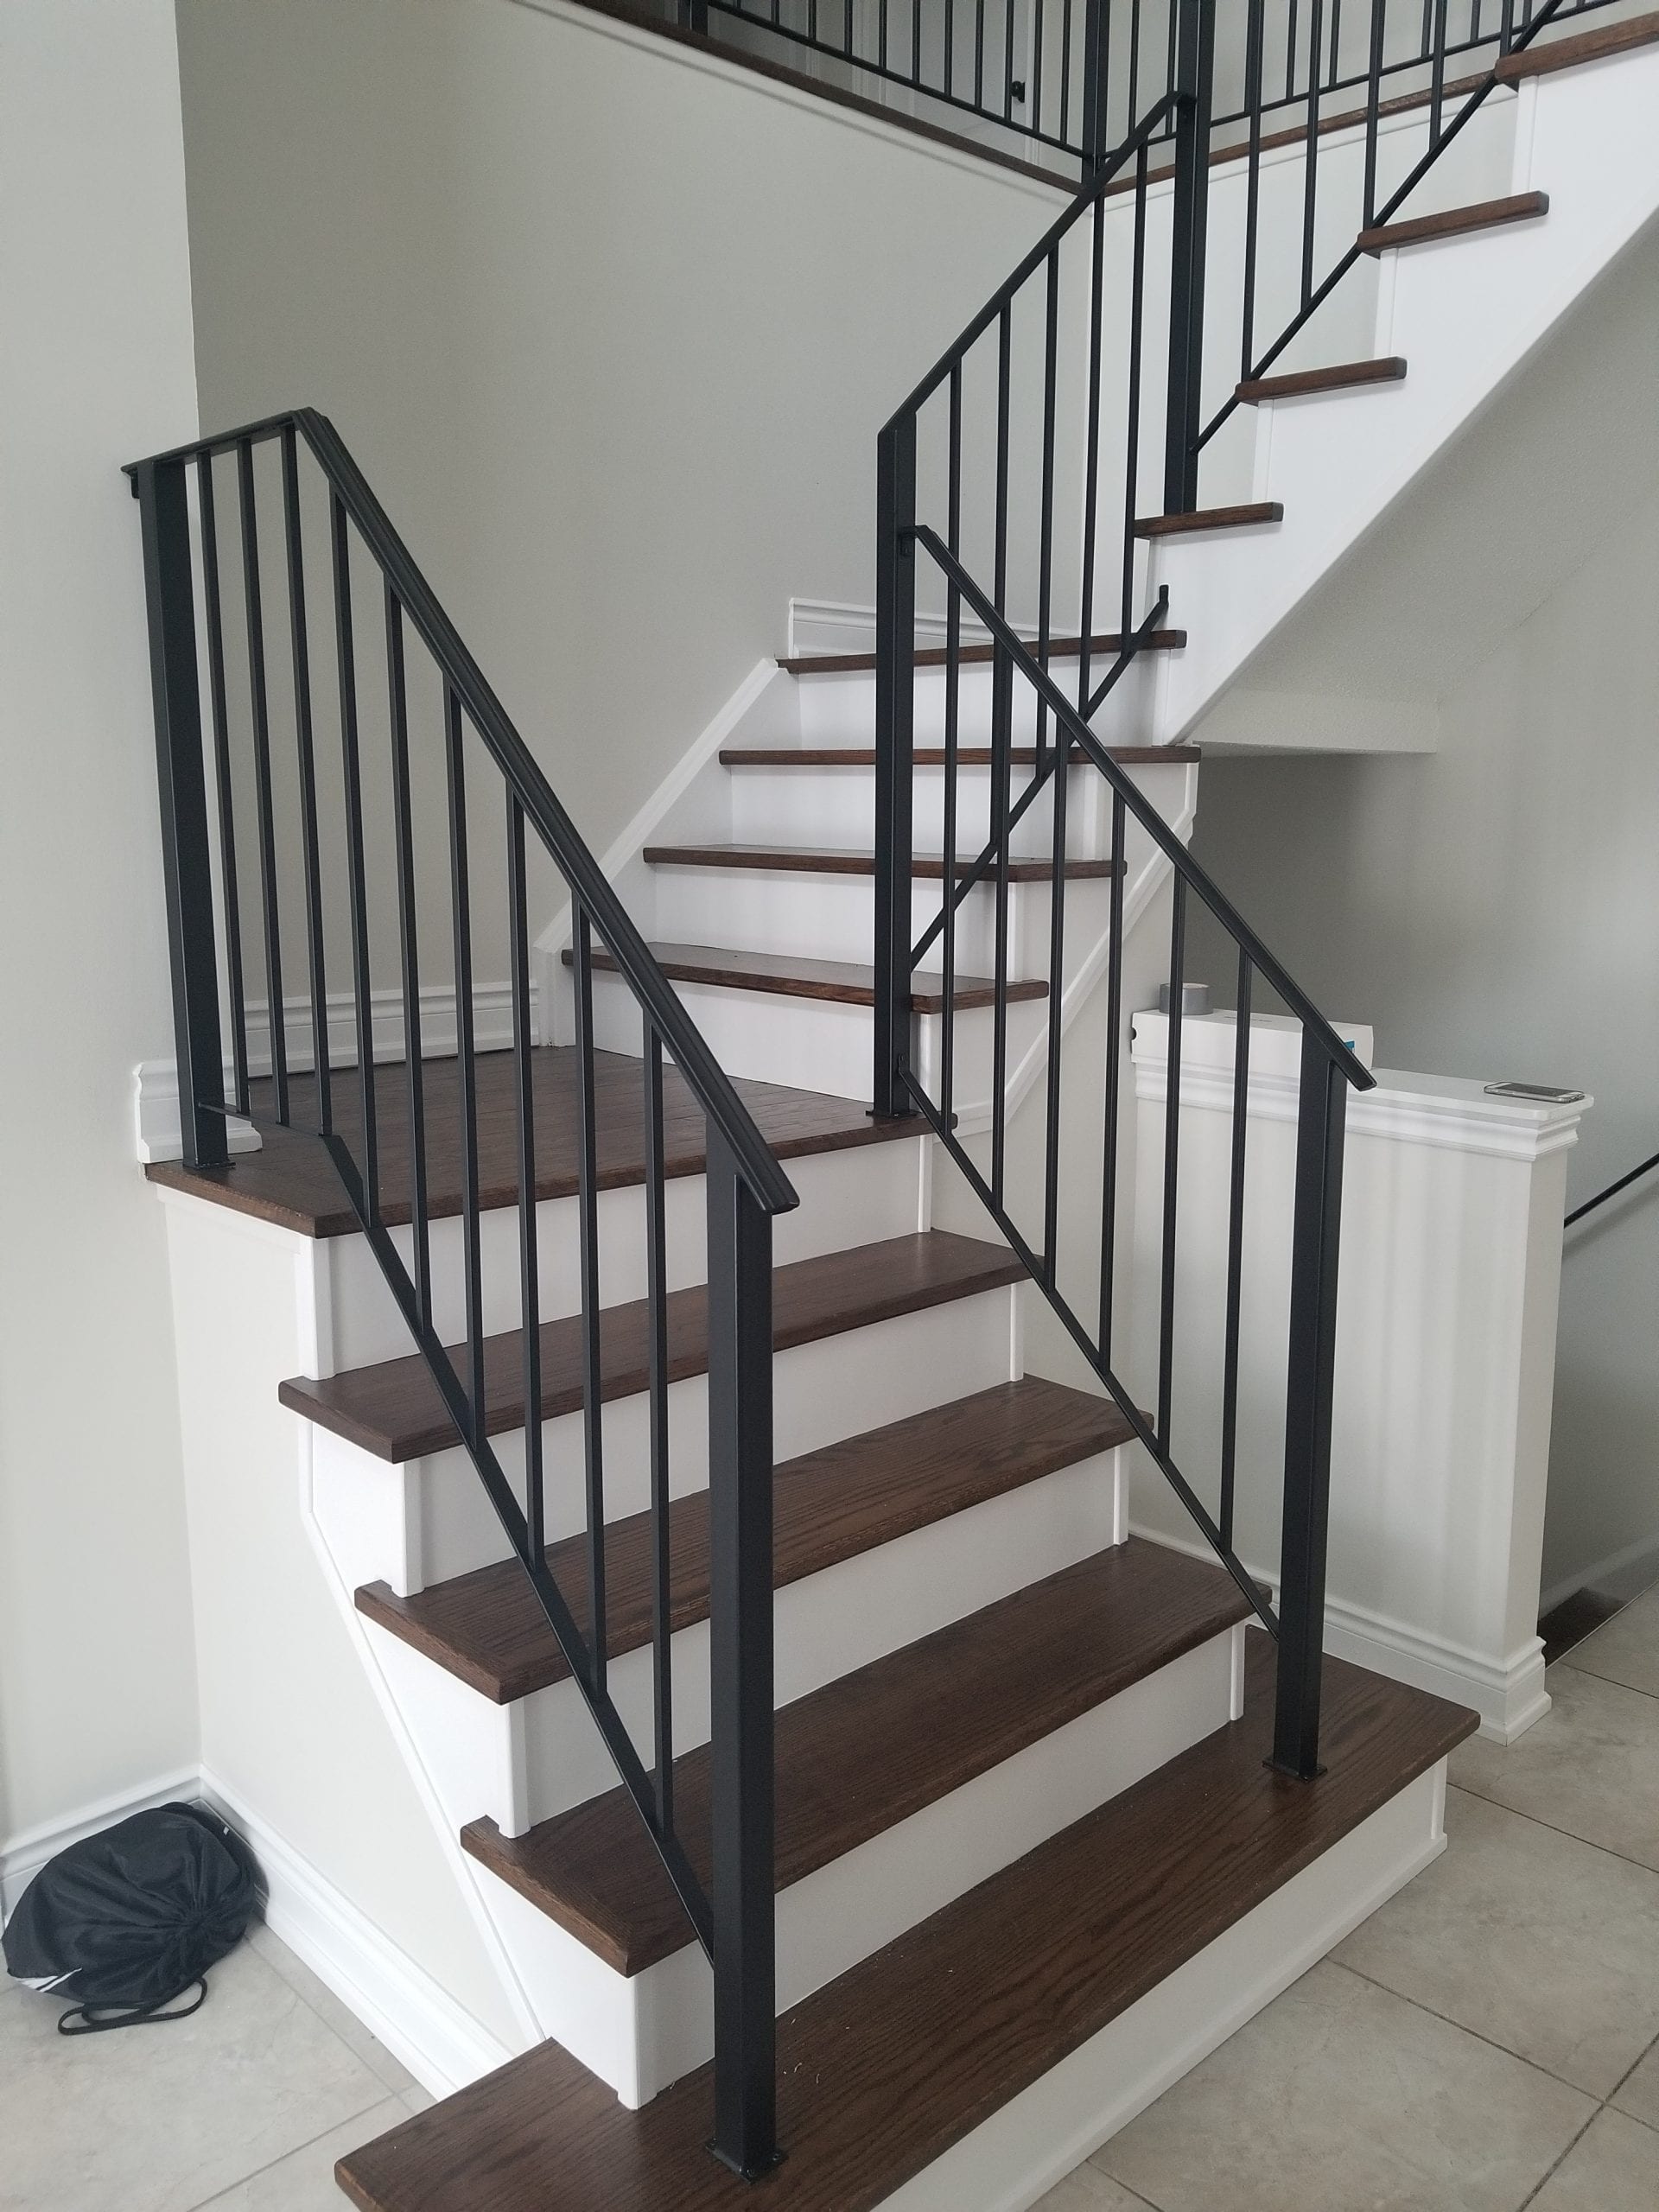 Stair Railings Know more about our service and see the gallery SMW